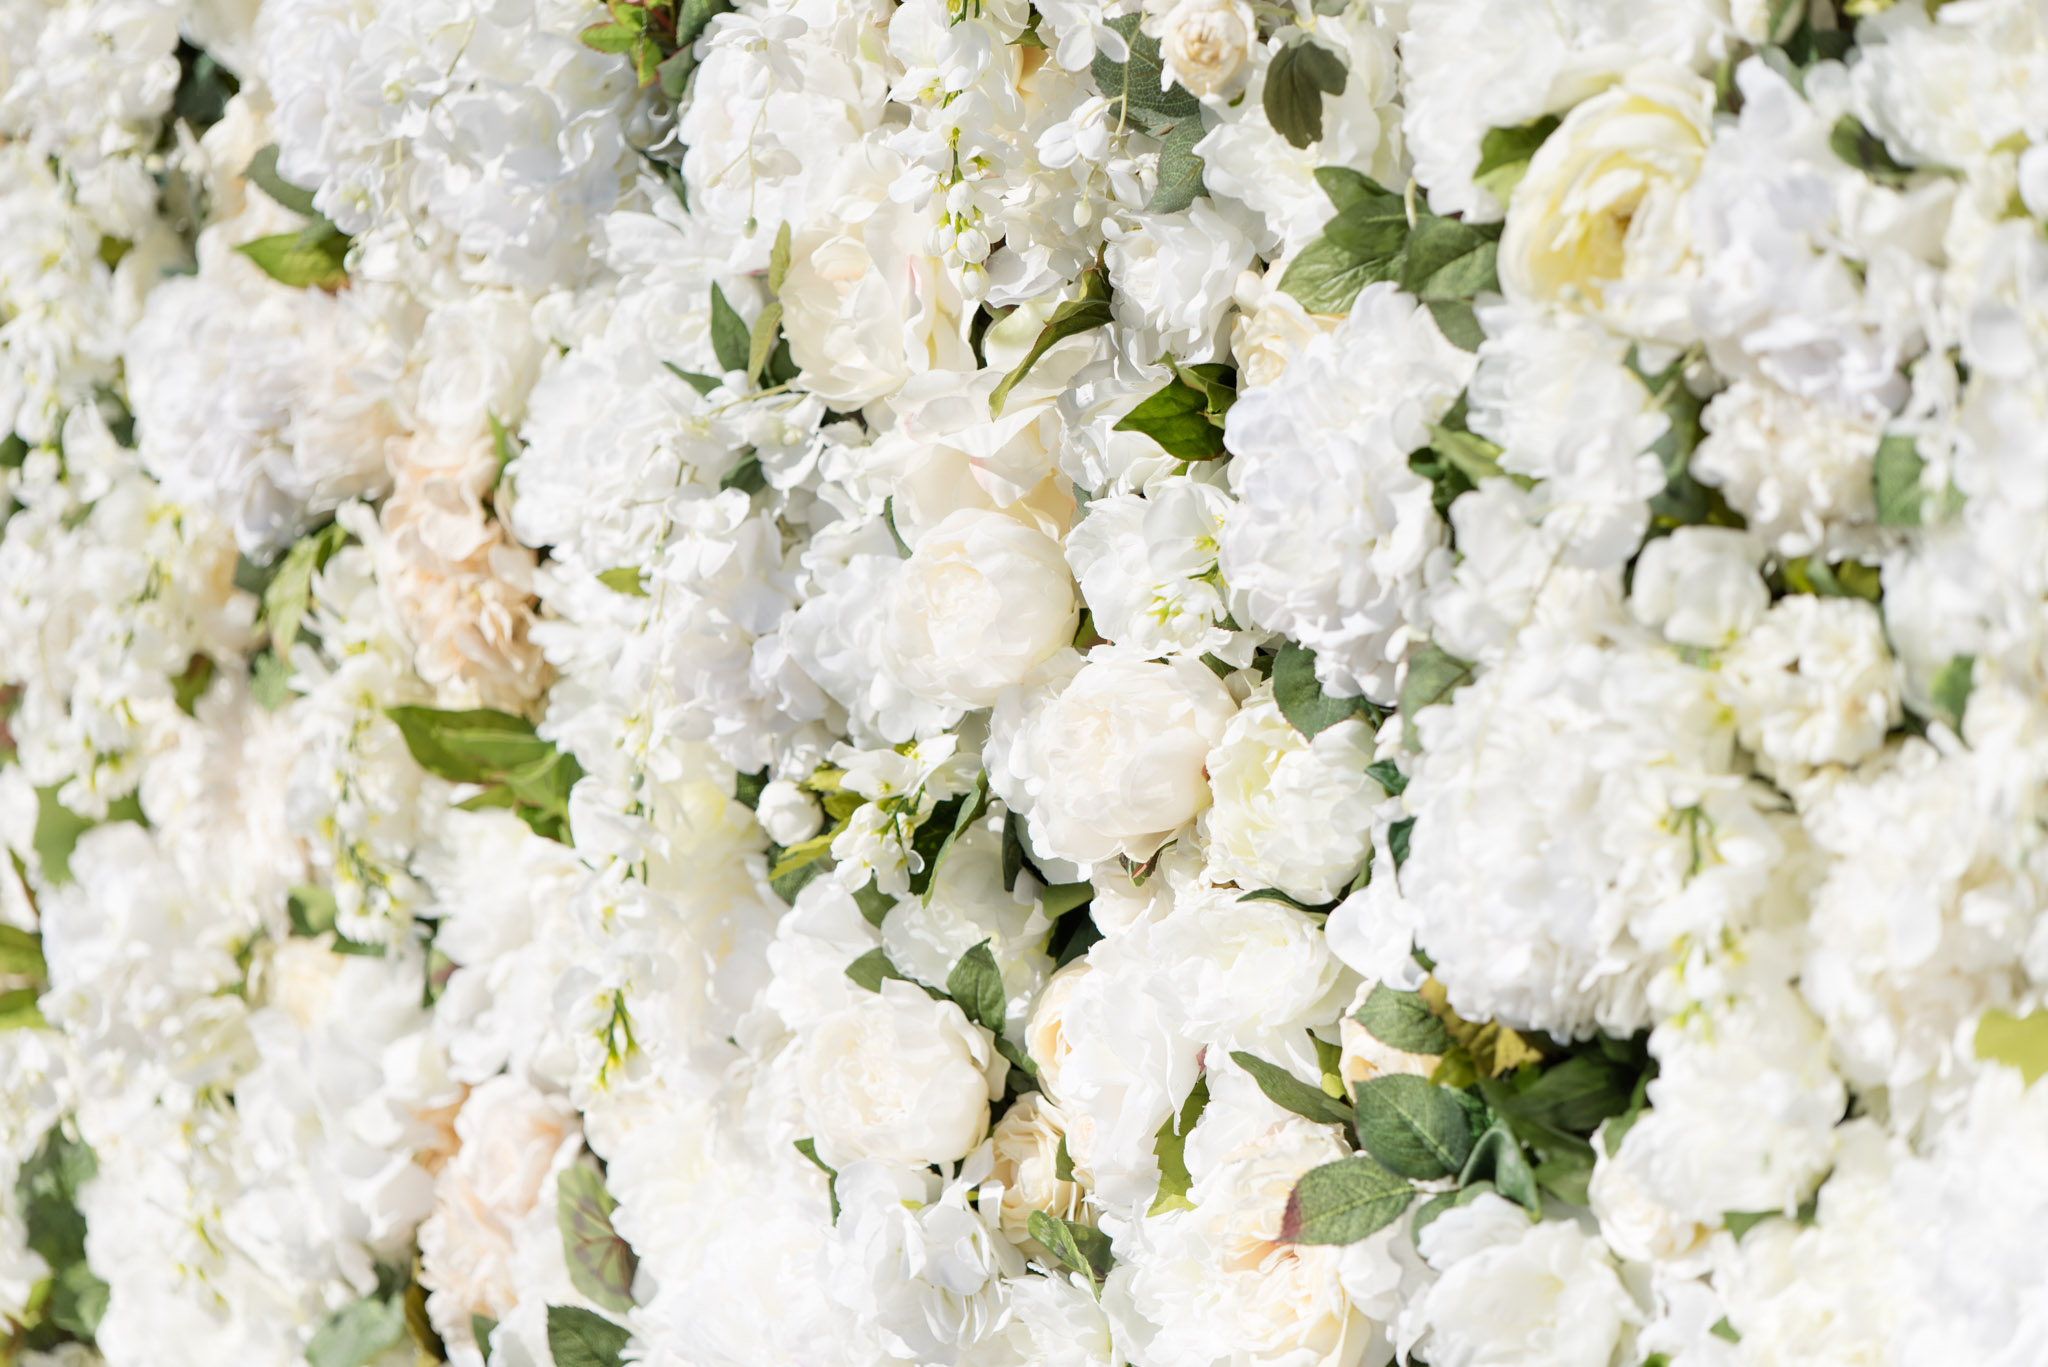 White flower wall at ceremony.